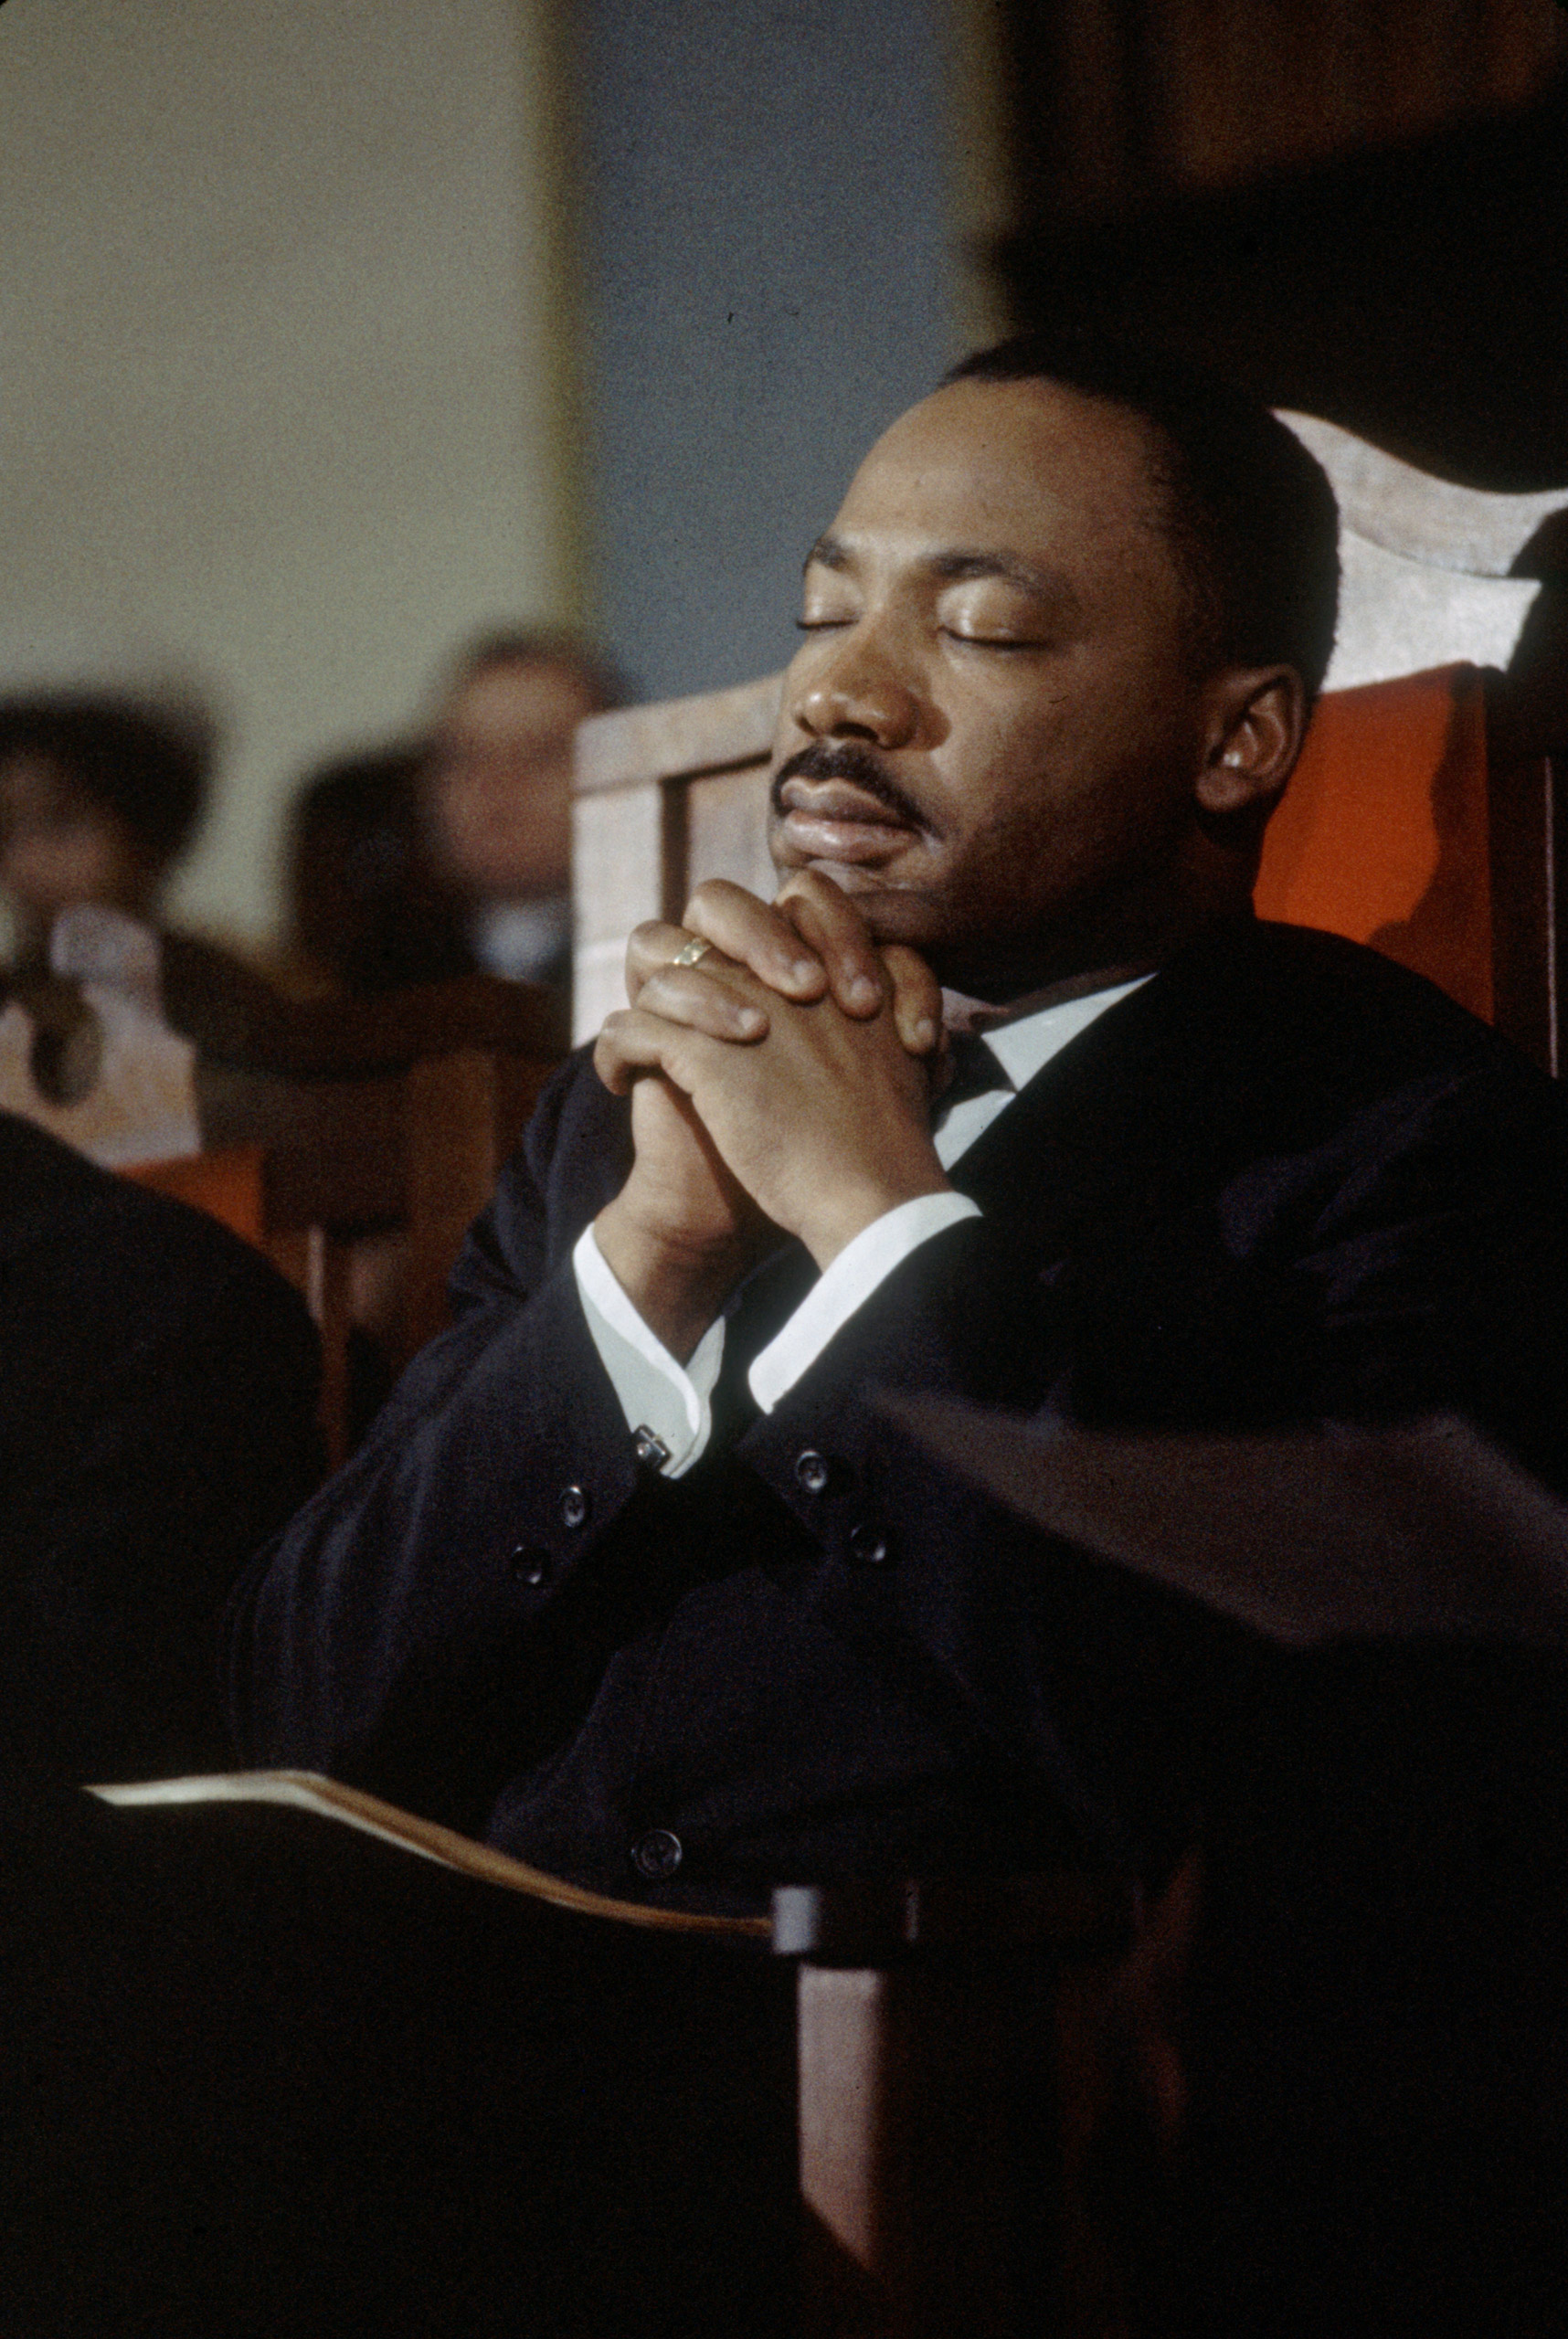 Civil Rights leader Martin Luther King Jr leads a prayer in a church before the second Selma to Montgomery Civil Rights march, also known as 'Turnaround Tuesday', Selma, Alabama, 9th March 1965.